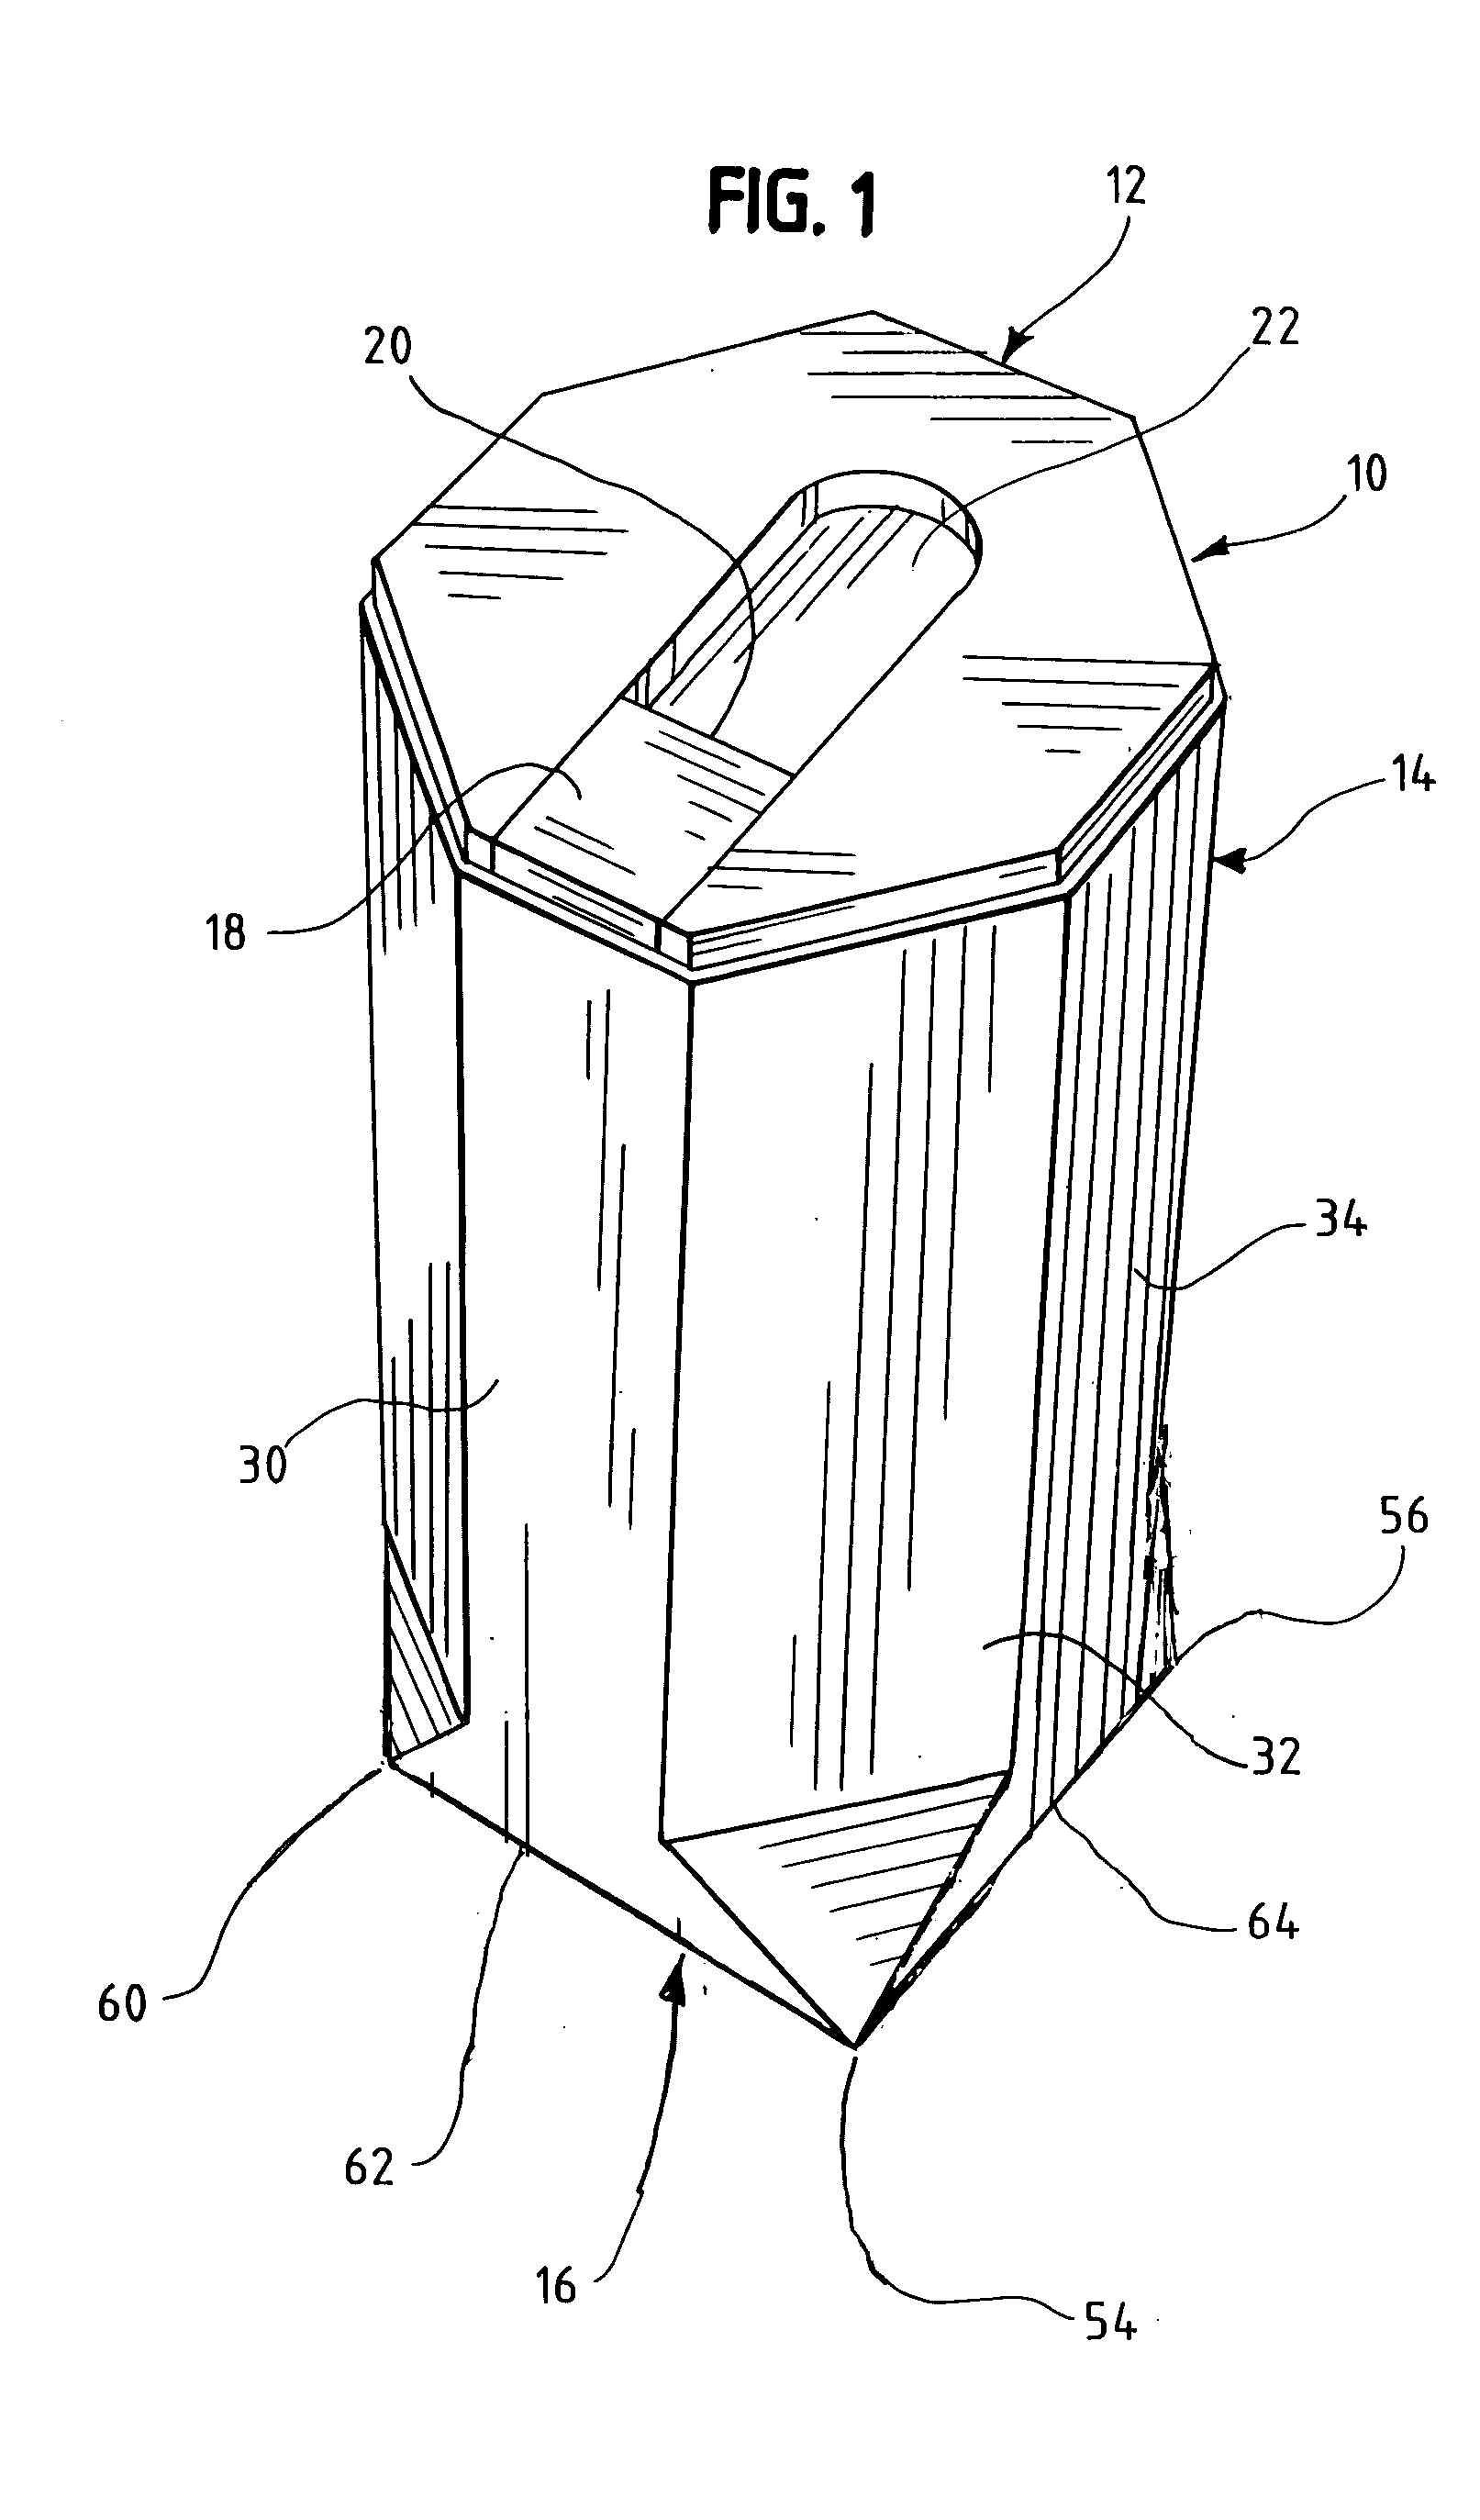 Multi-sided package with easily openable lid